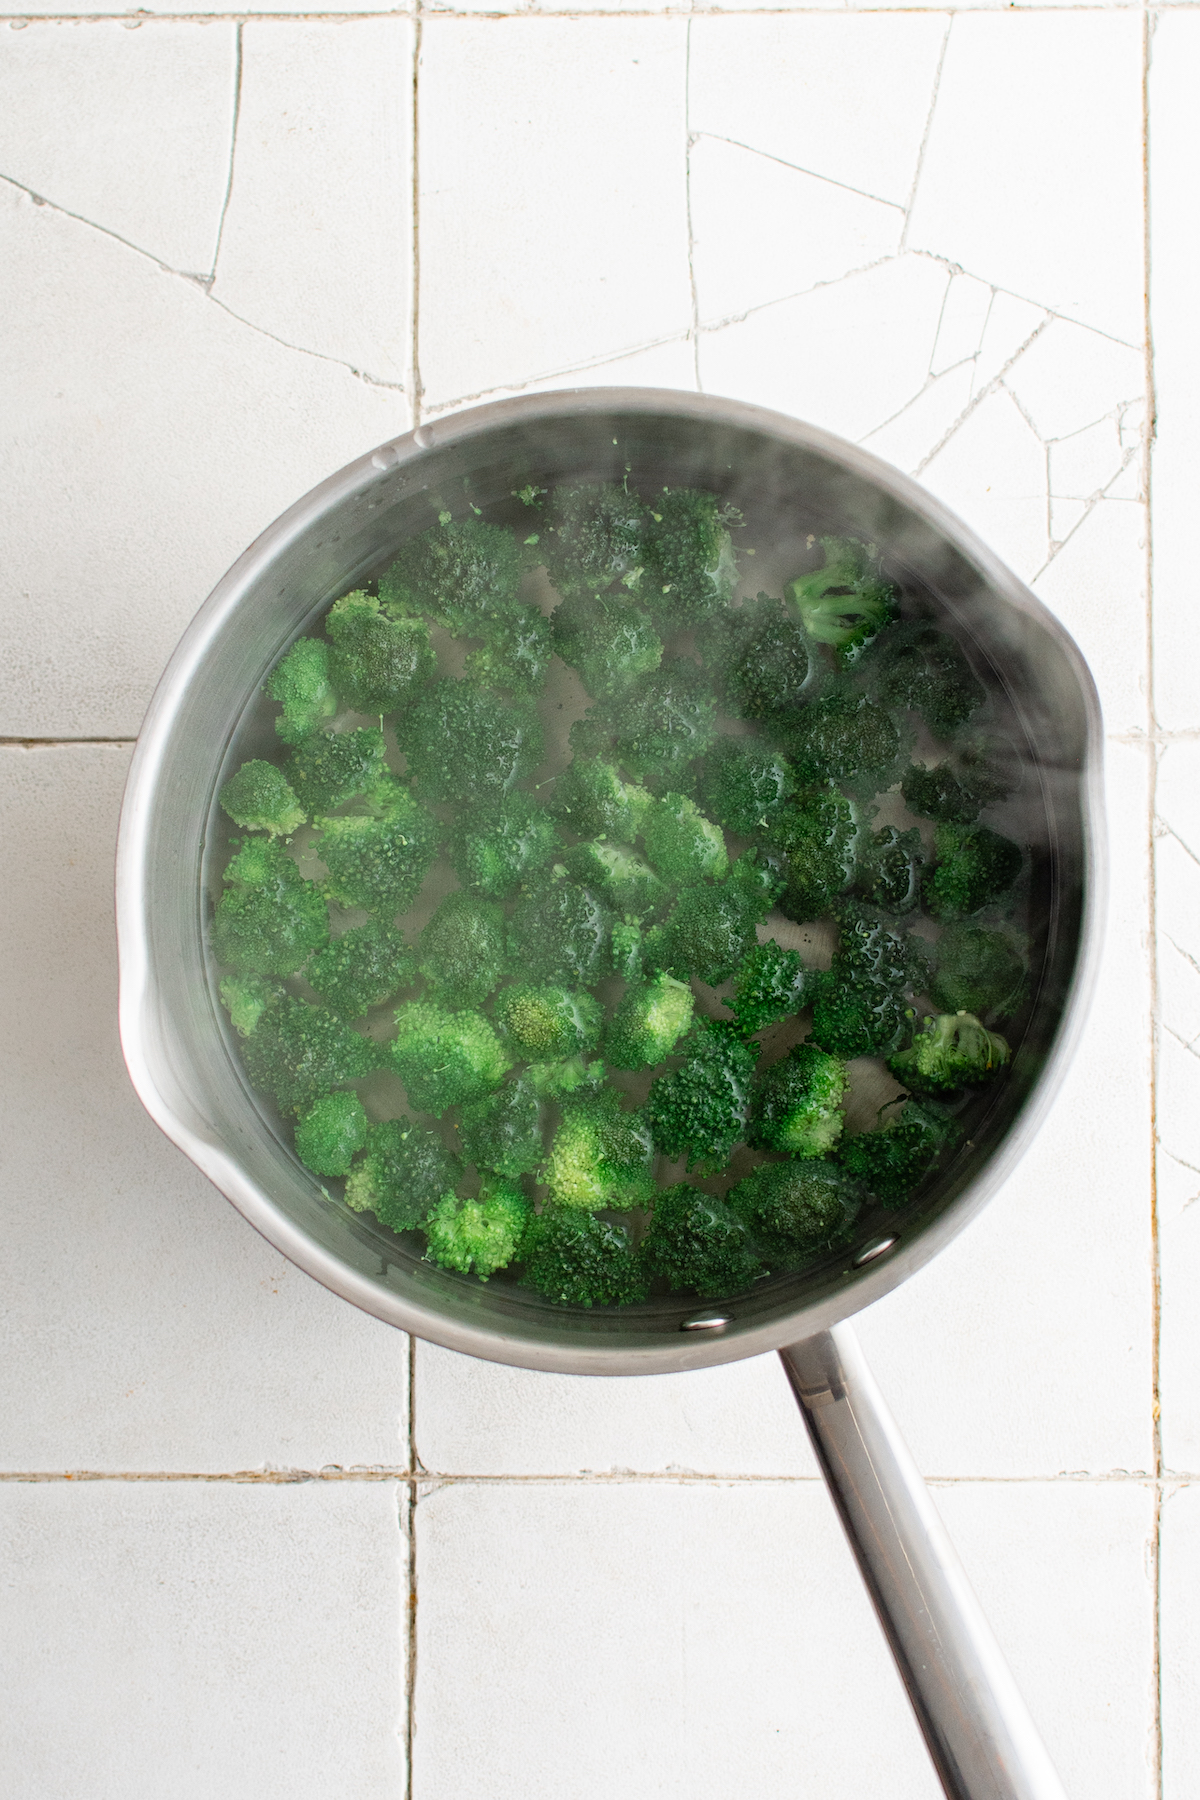 Broccoli boiling in a pot for a baked potato recipe.